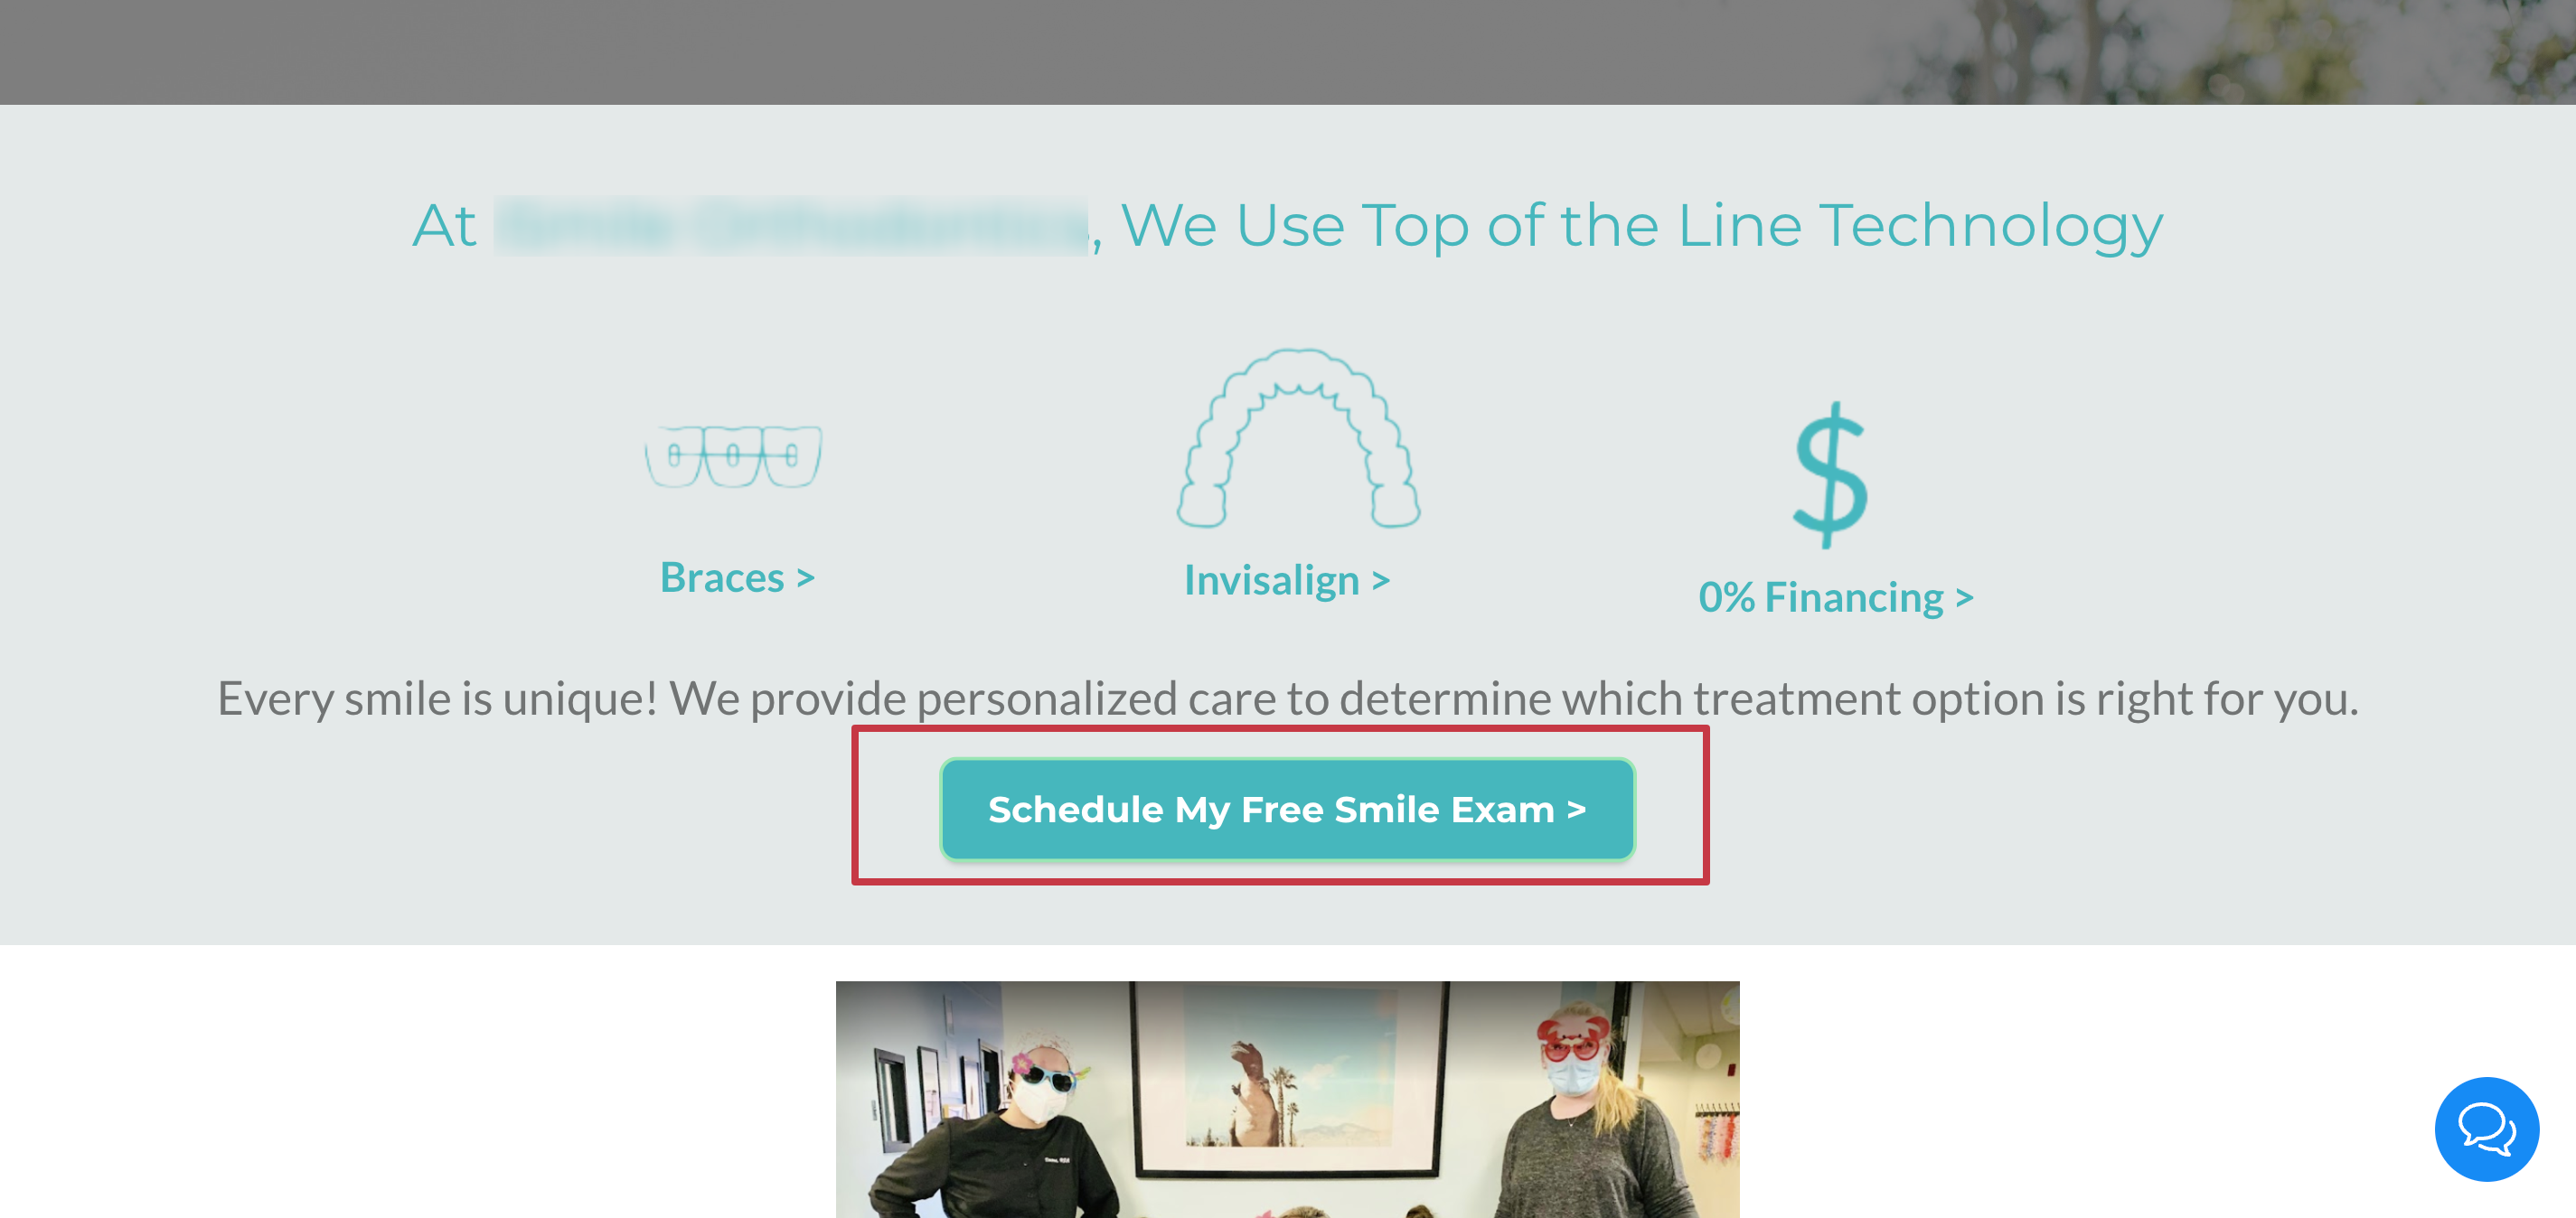 Example of a landing page with a strong CTA.